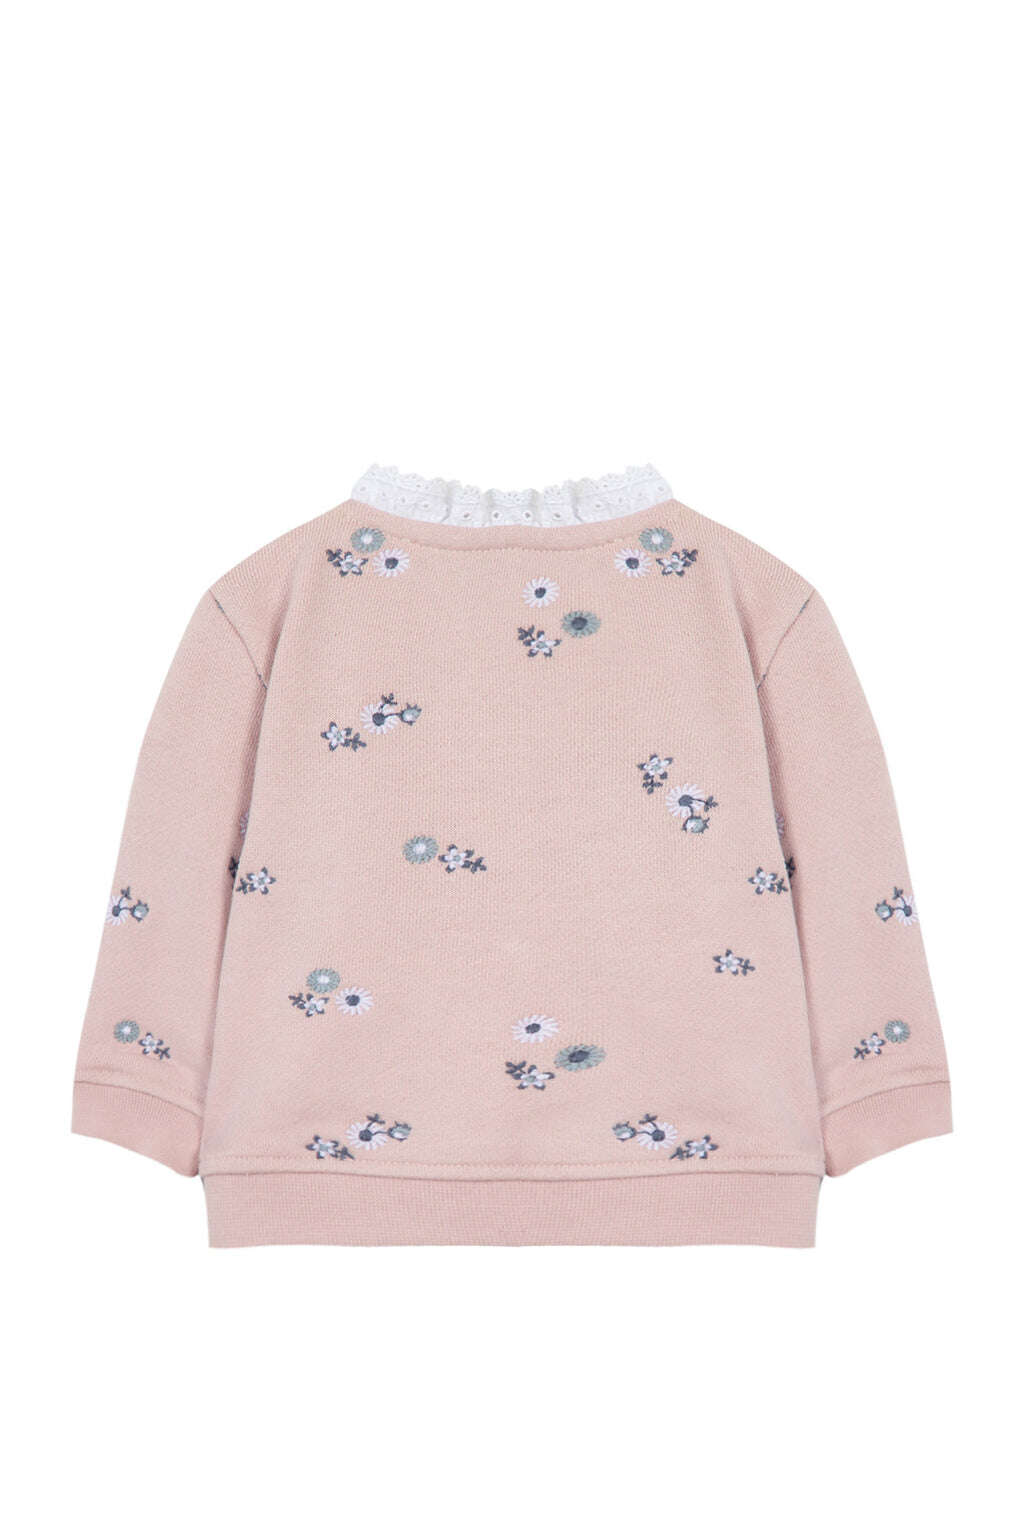 Sweat-shirt - Lilas broderie florale